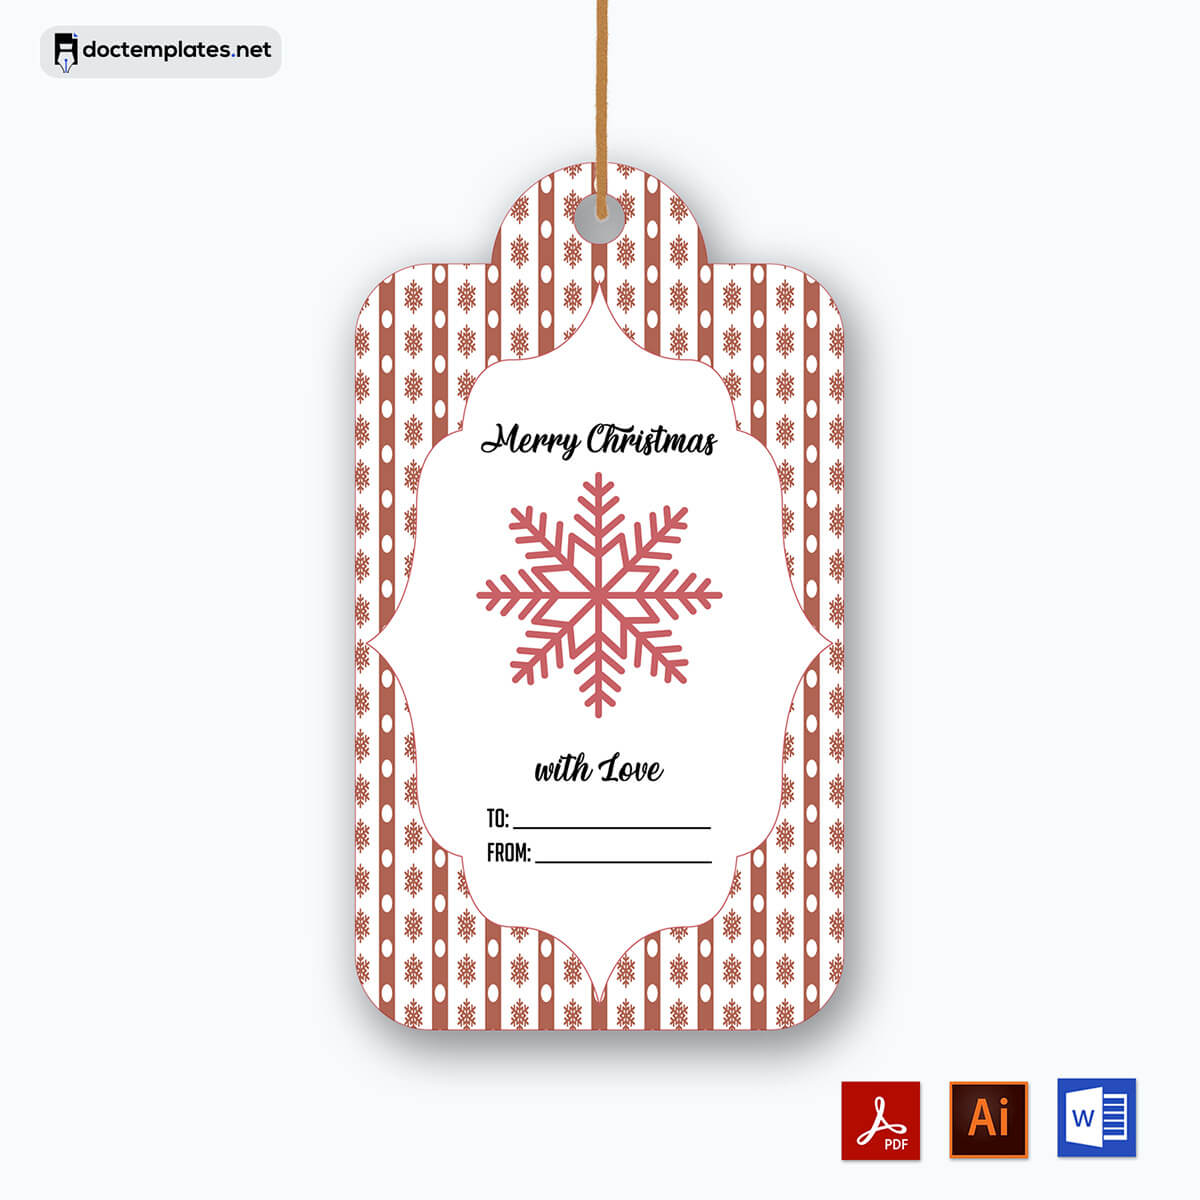 Create Stunning Gift Tags with Adobe Illustrator Templates